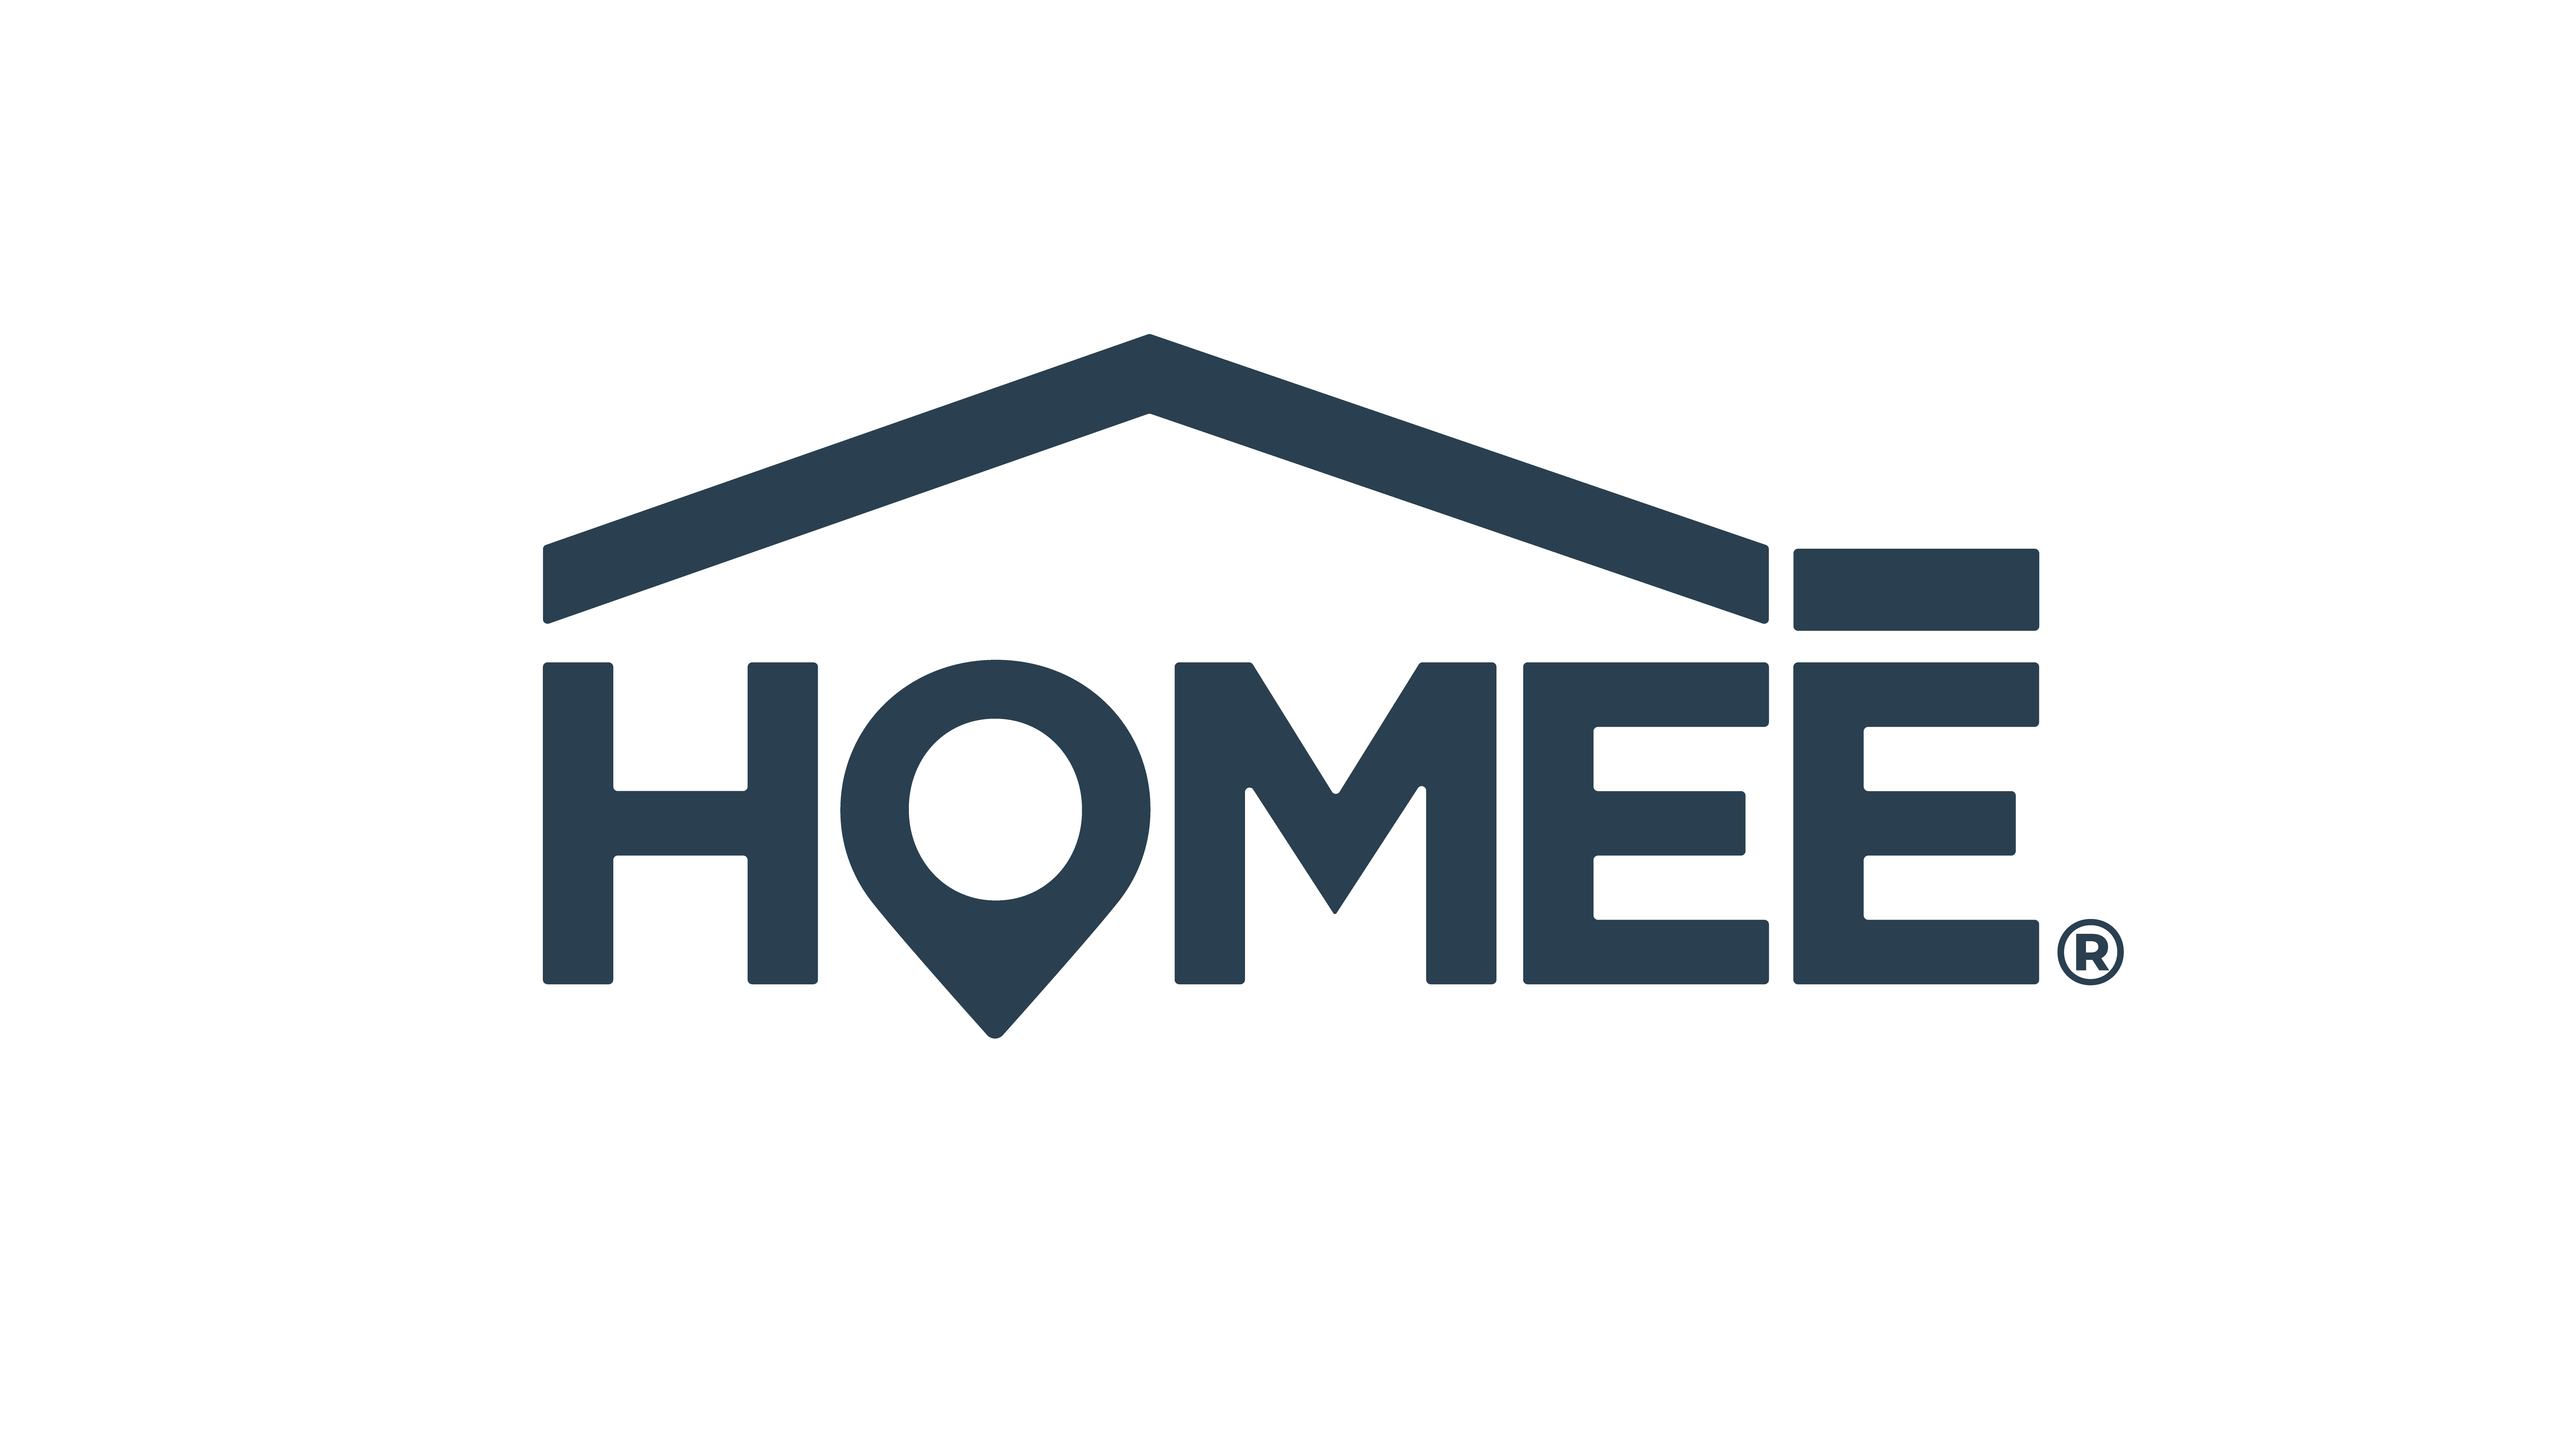 HOMEE to Present at the PYMNTS and Visa – 2019 B2B Payments Executive Forum